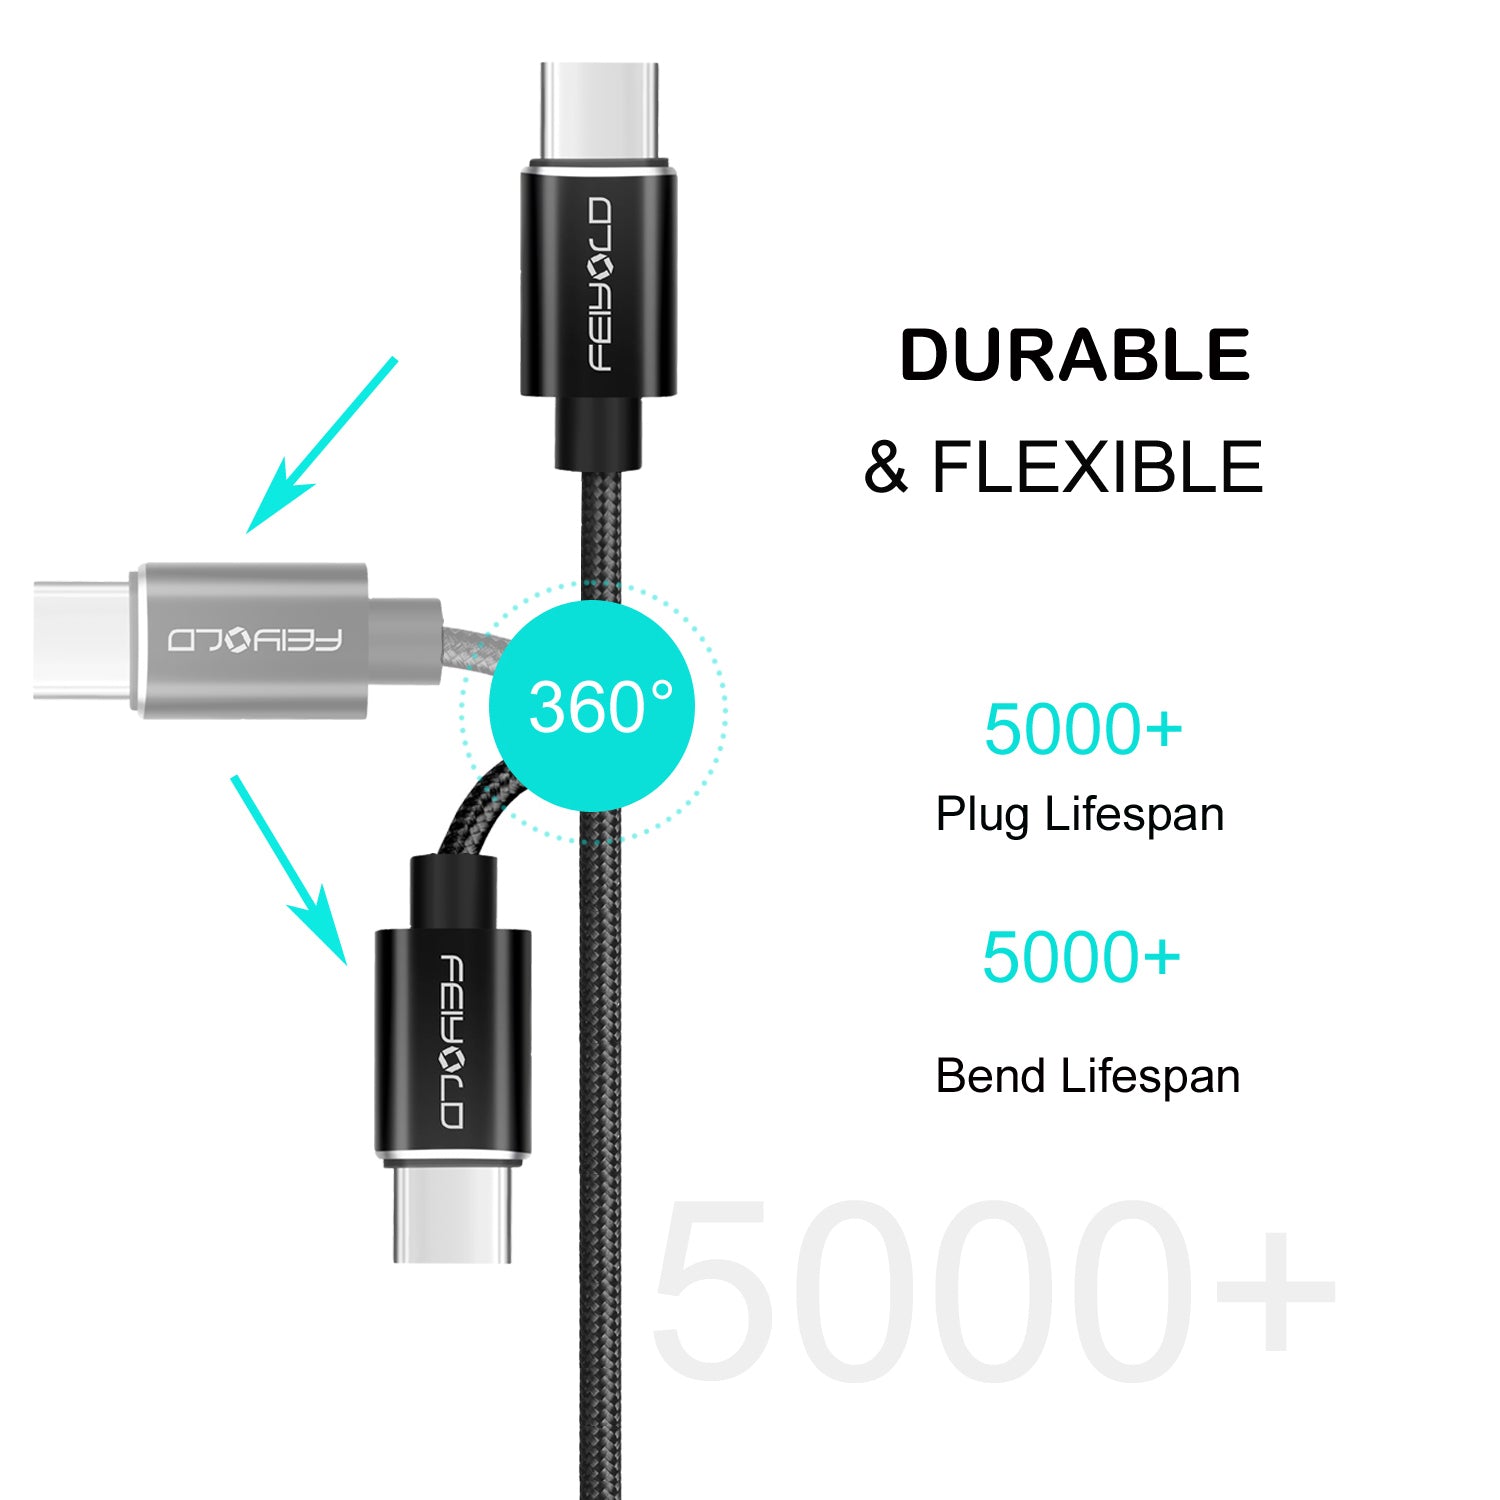 FEIYOLD Type C Cable,FEIYOLD High Speed USB C Cable [1Pack/1M] Nylon Braided Fast Charging USB Type C Compatible with Samsung Galaxy S9/S8+/S8,Note 8, HTC 10,Pixel 2xl,Pixel C etc-Black